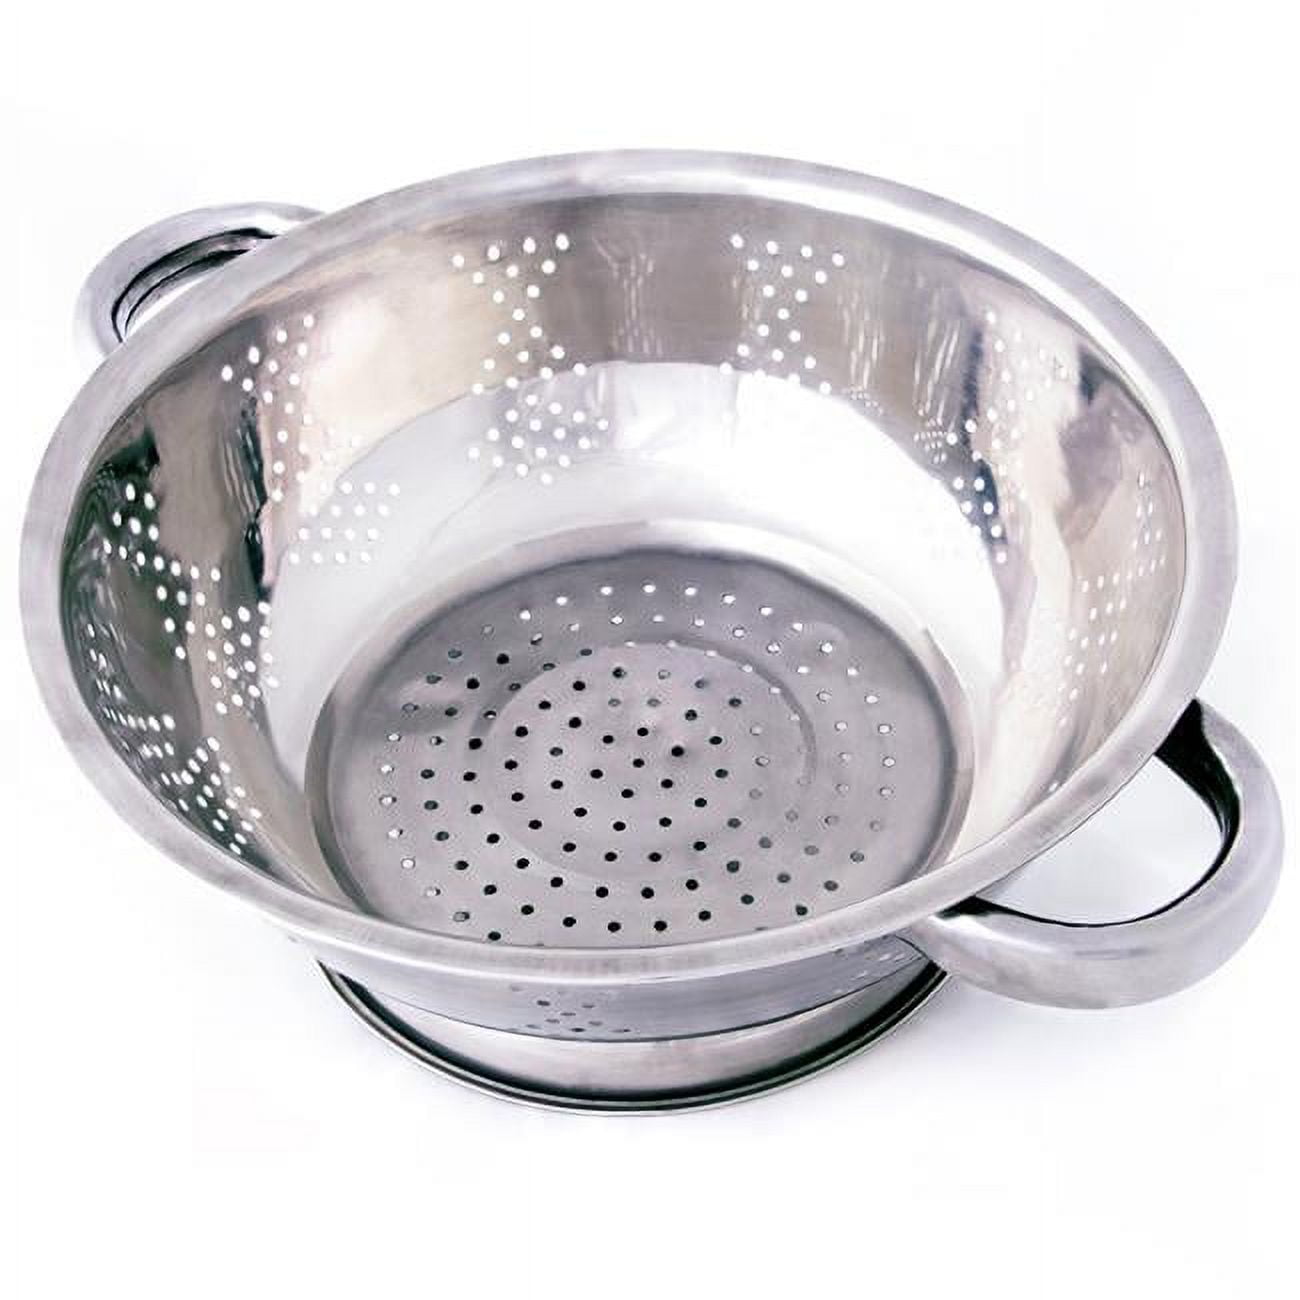 Picture of Brybelly KCOL-002 Stainless Steel Kitchen Colander - 2.5 qt